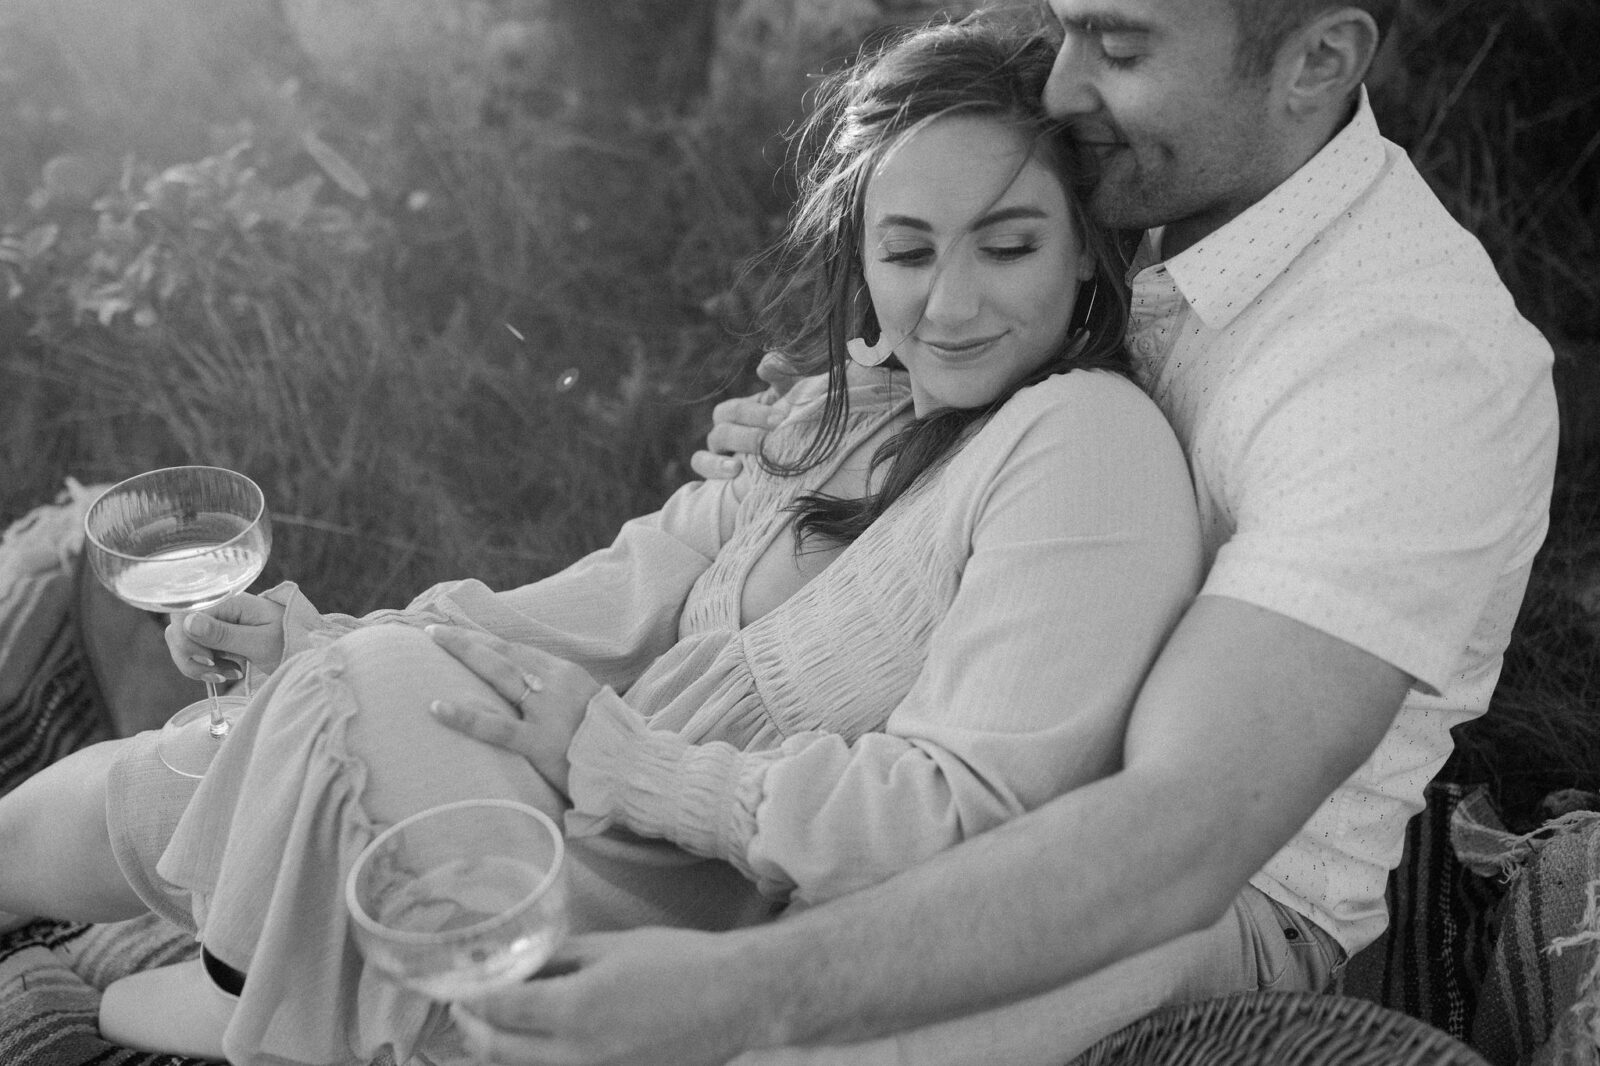 Couples Sonoma coast engagement photos with a picnic